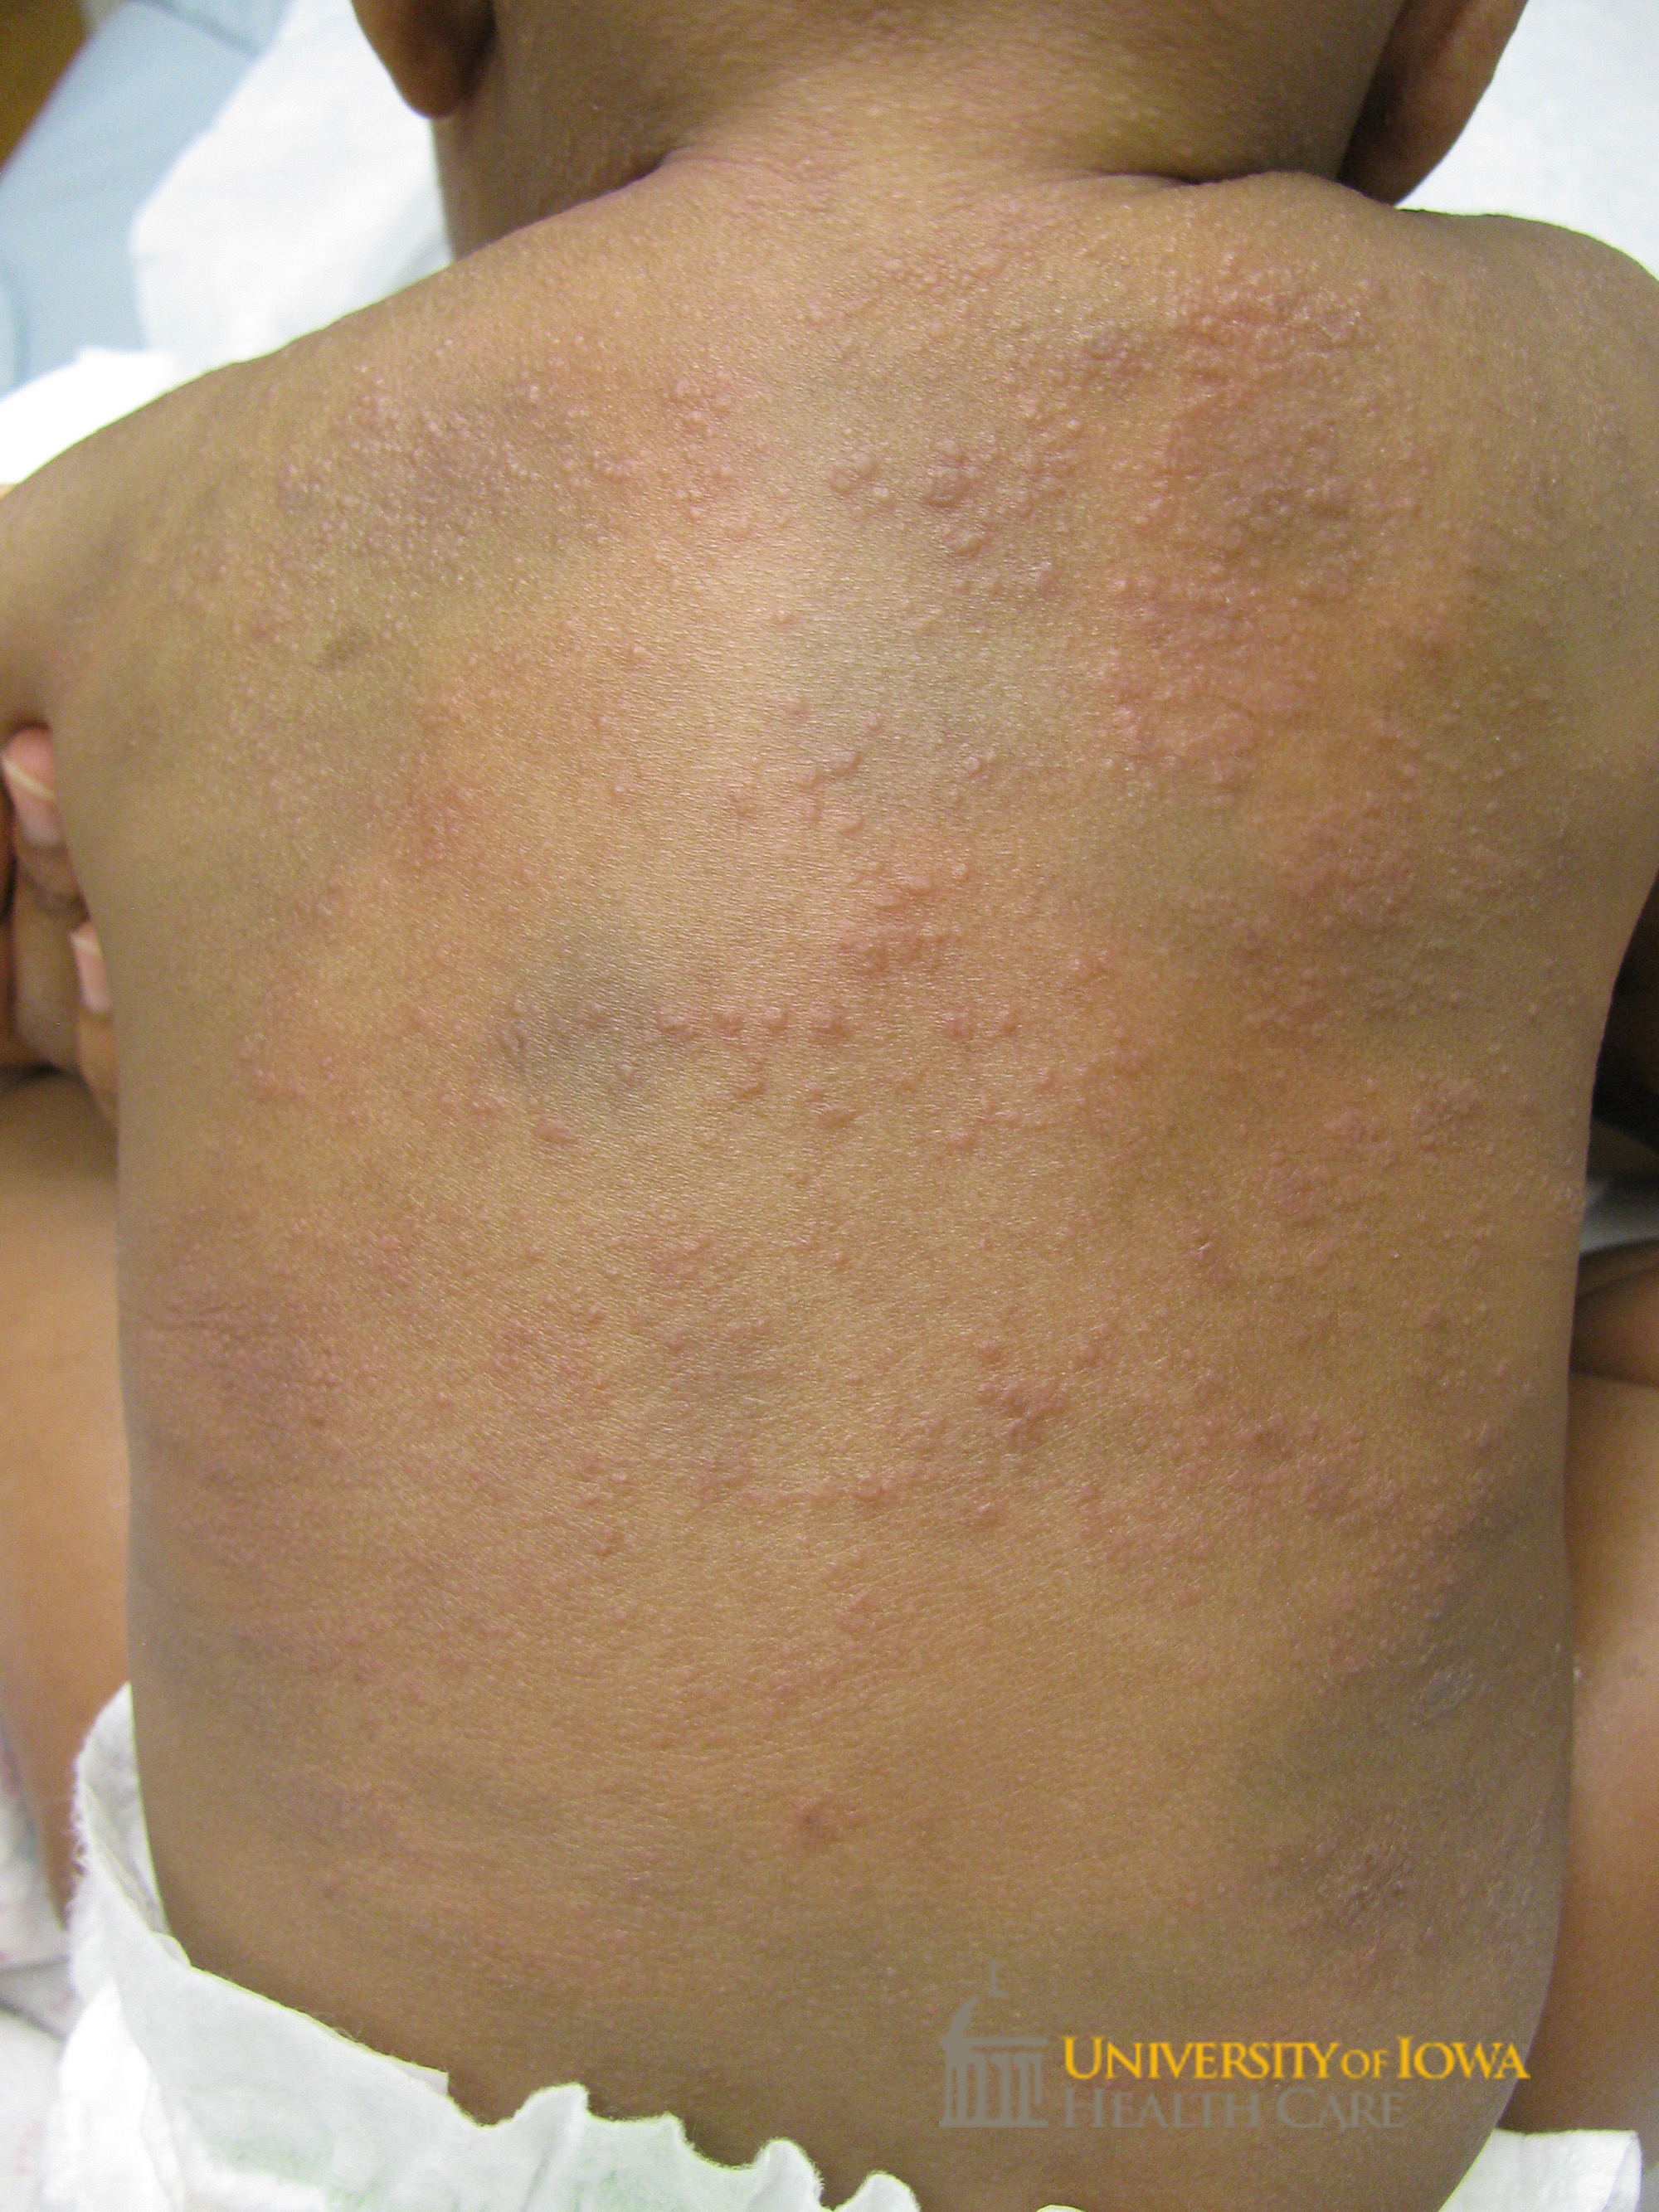 Erythematous papules on the back. (click images for higher resolution).